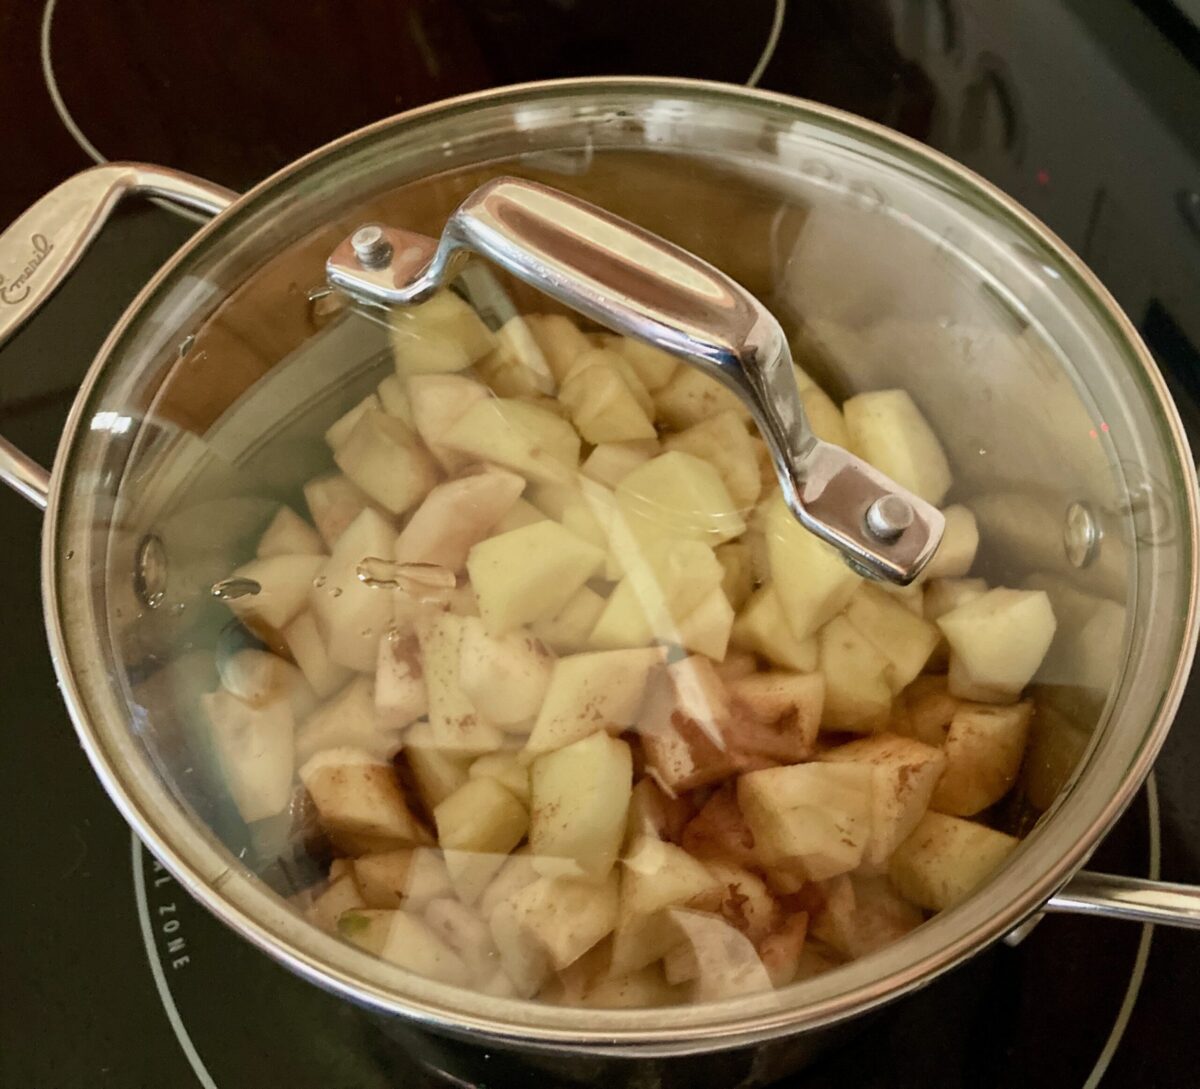 Covered pot filled with chopped apples, pears, cinnamon, water and lemon juice.